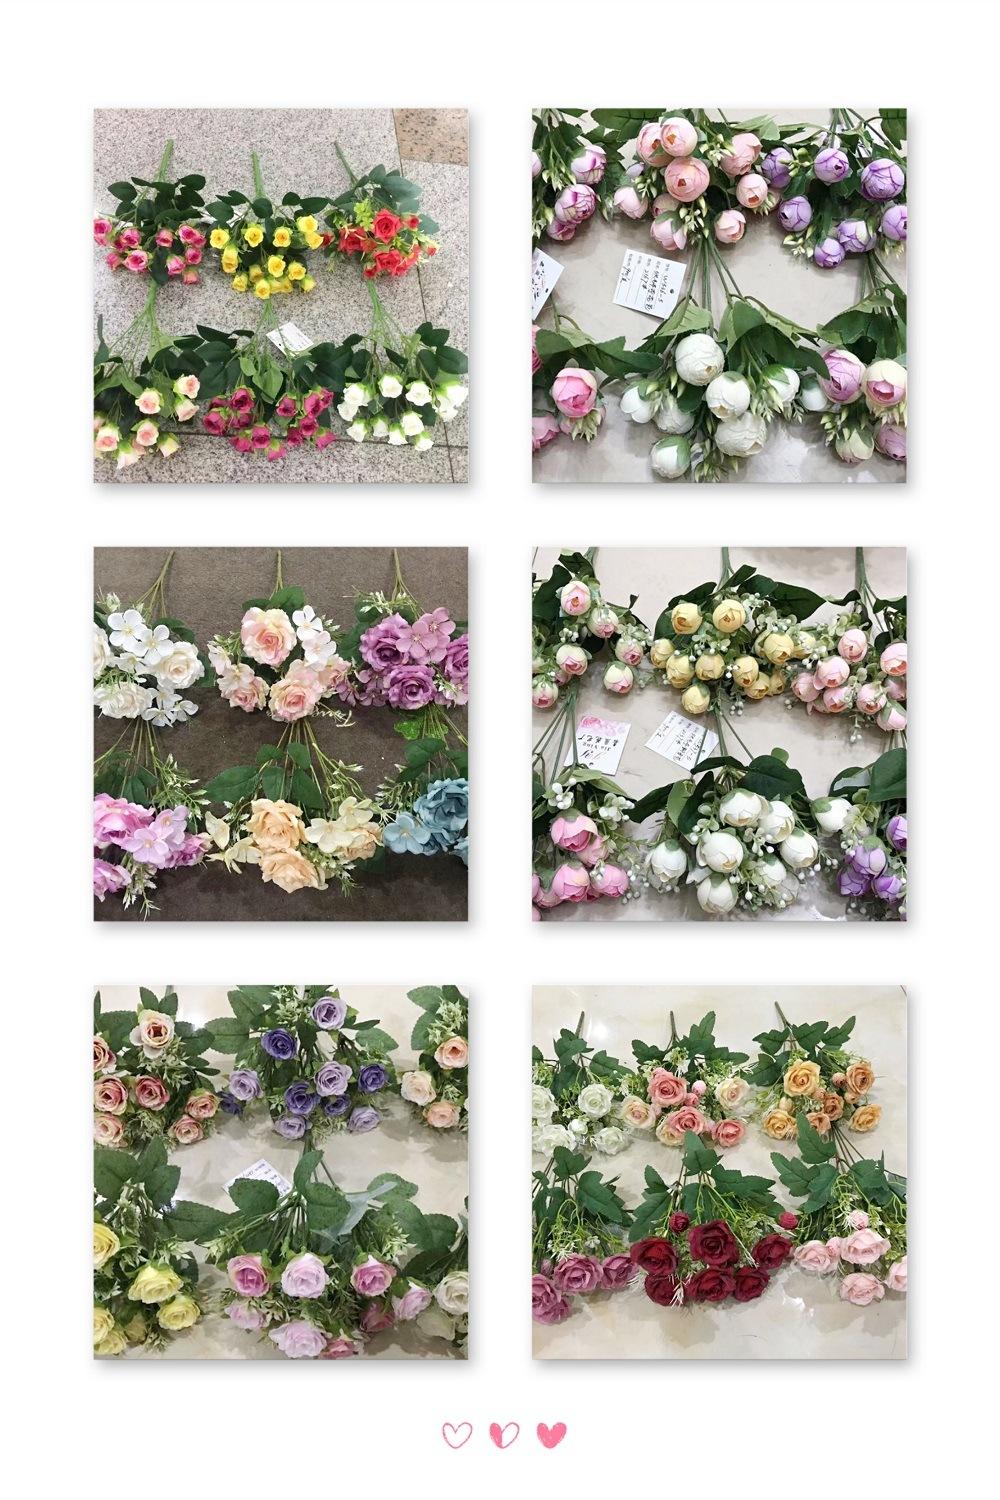 Best Selling Artificial Flowers Made in China